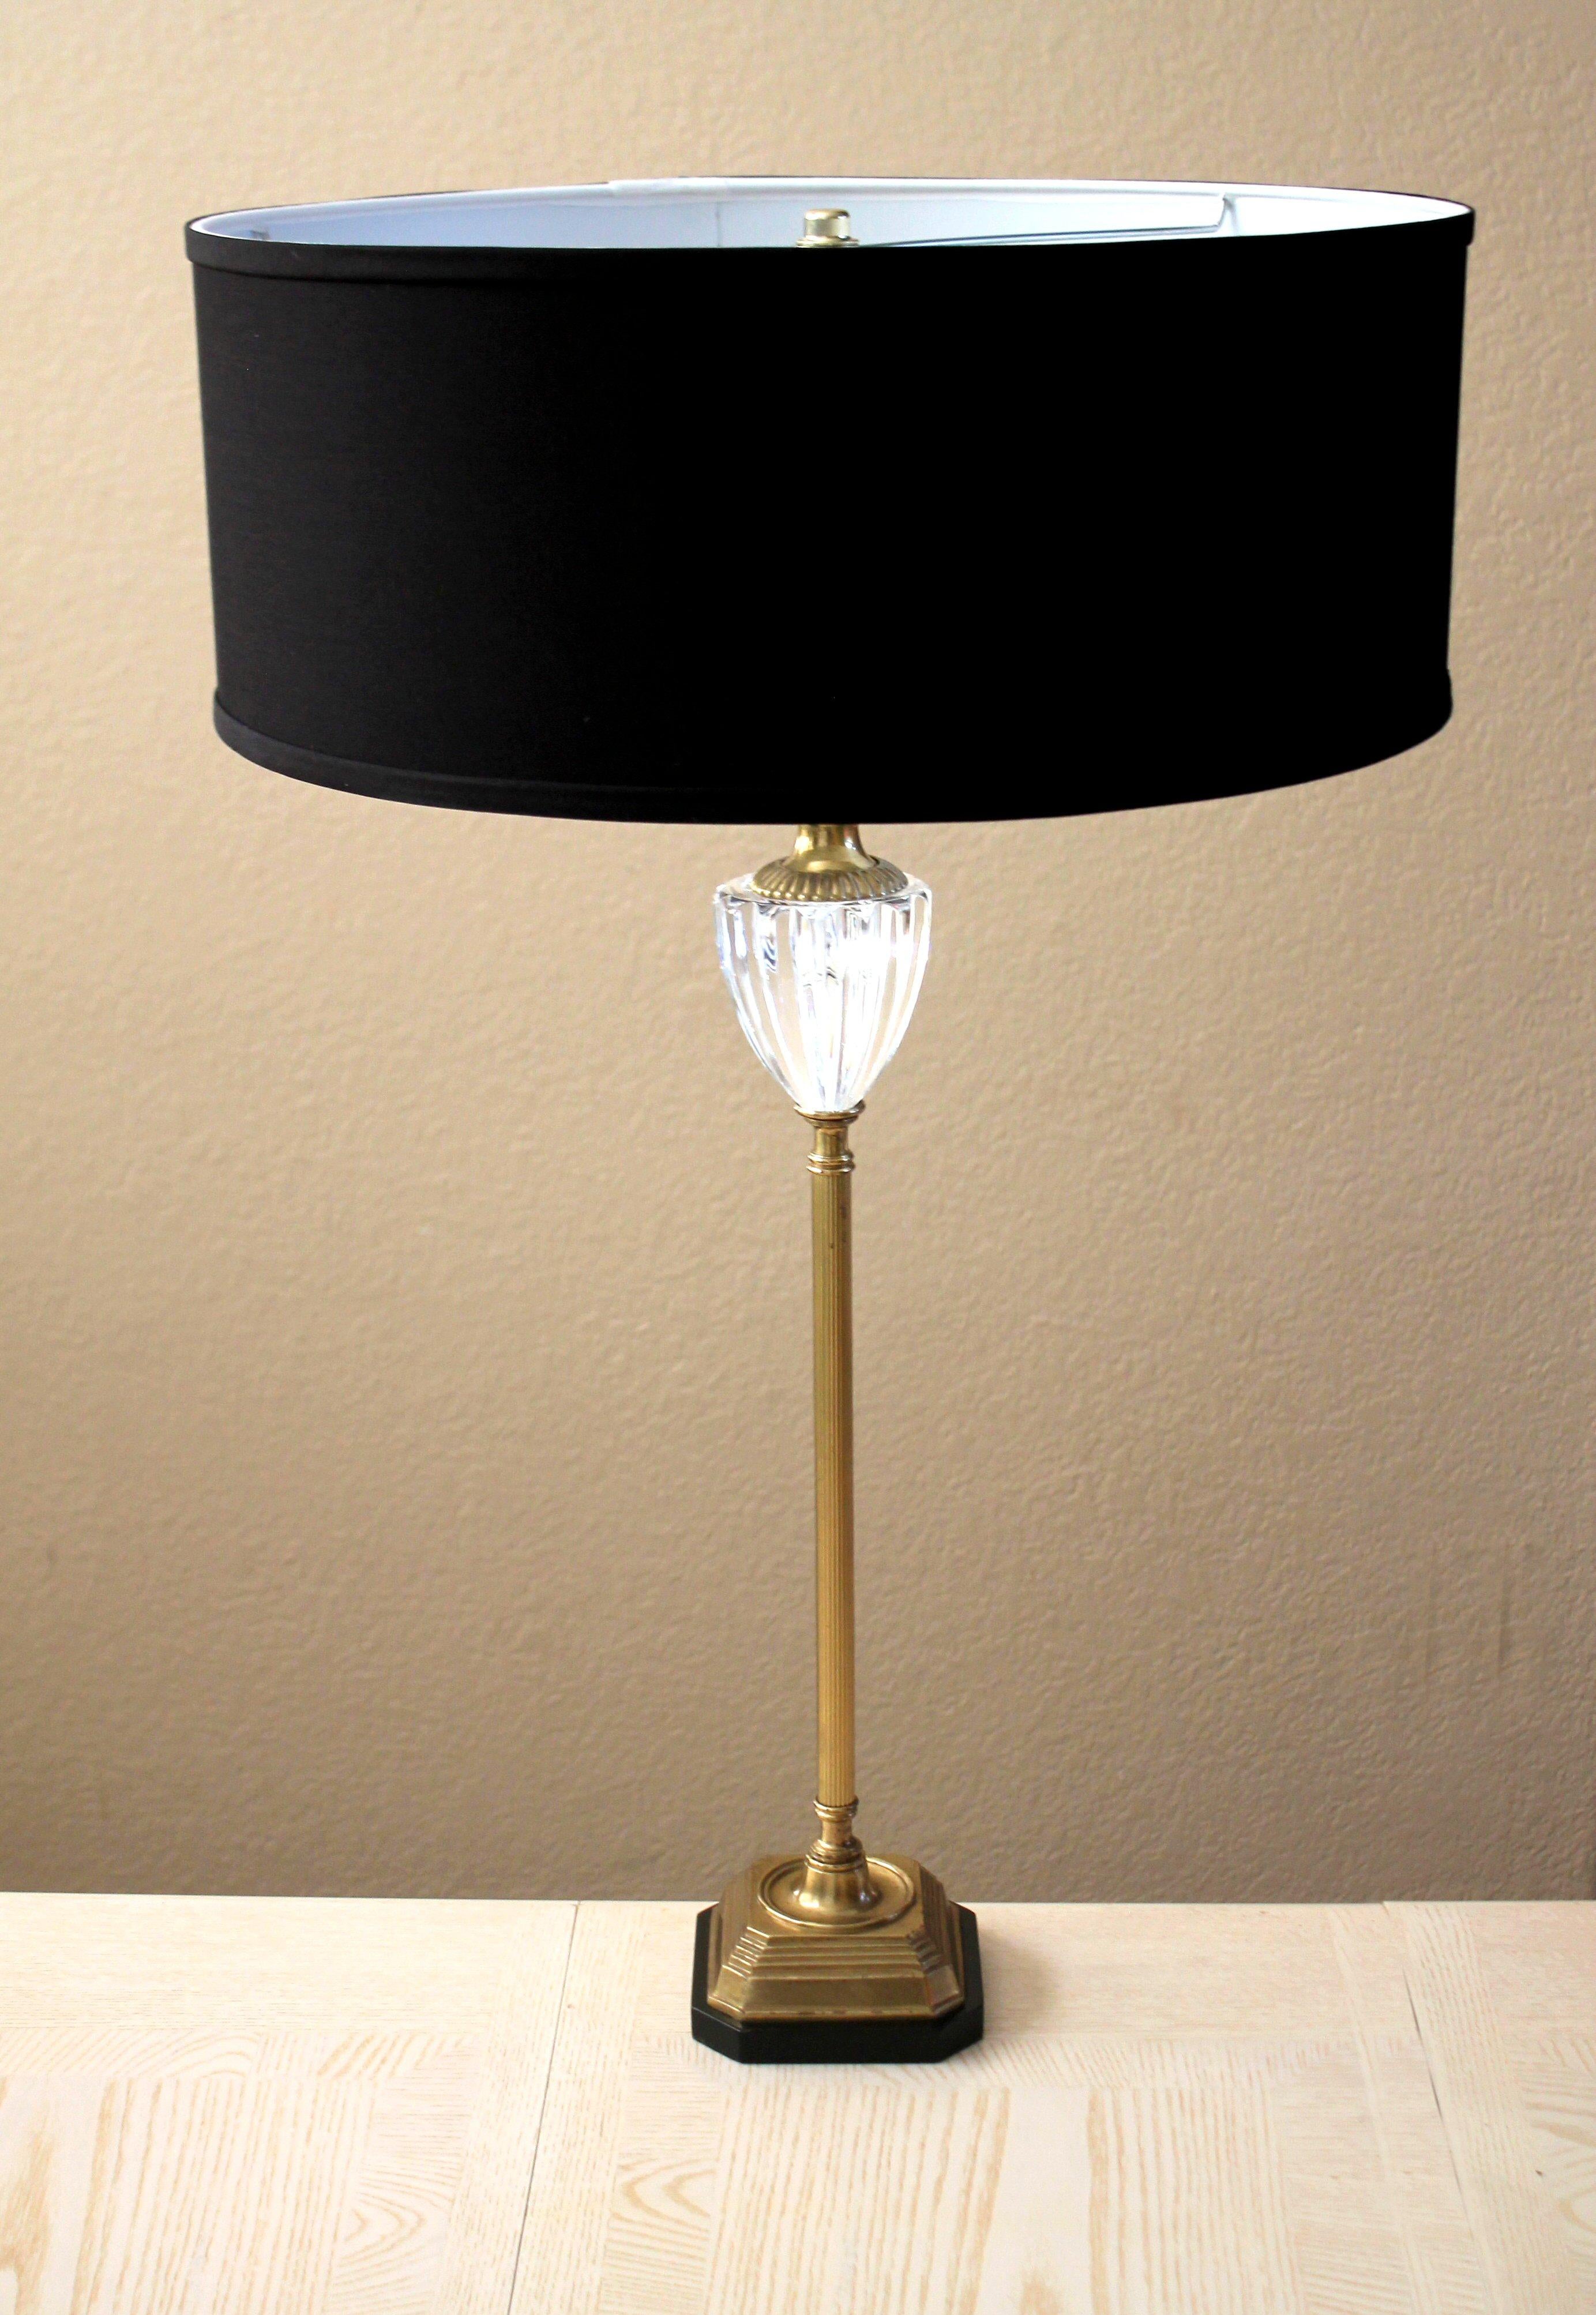 
EXQUISITE & RARE!

FREDERICK COOPER
CRYSTAL TABLE LAMP
HOLLYWOOD REGENCY

APPROXIMATE DIMENSIONS:   30